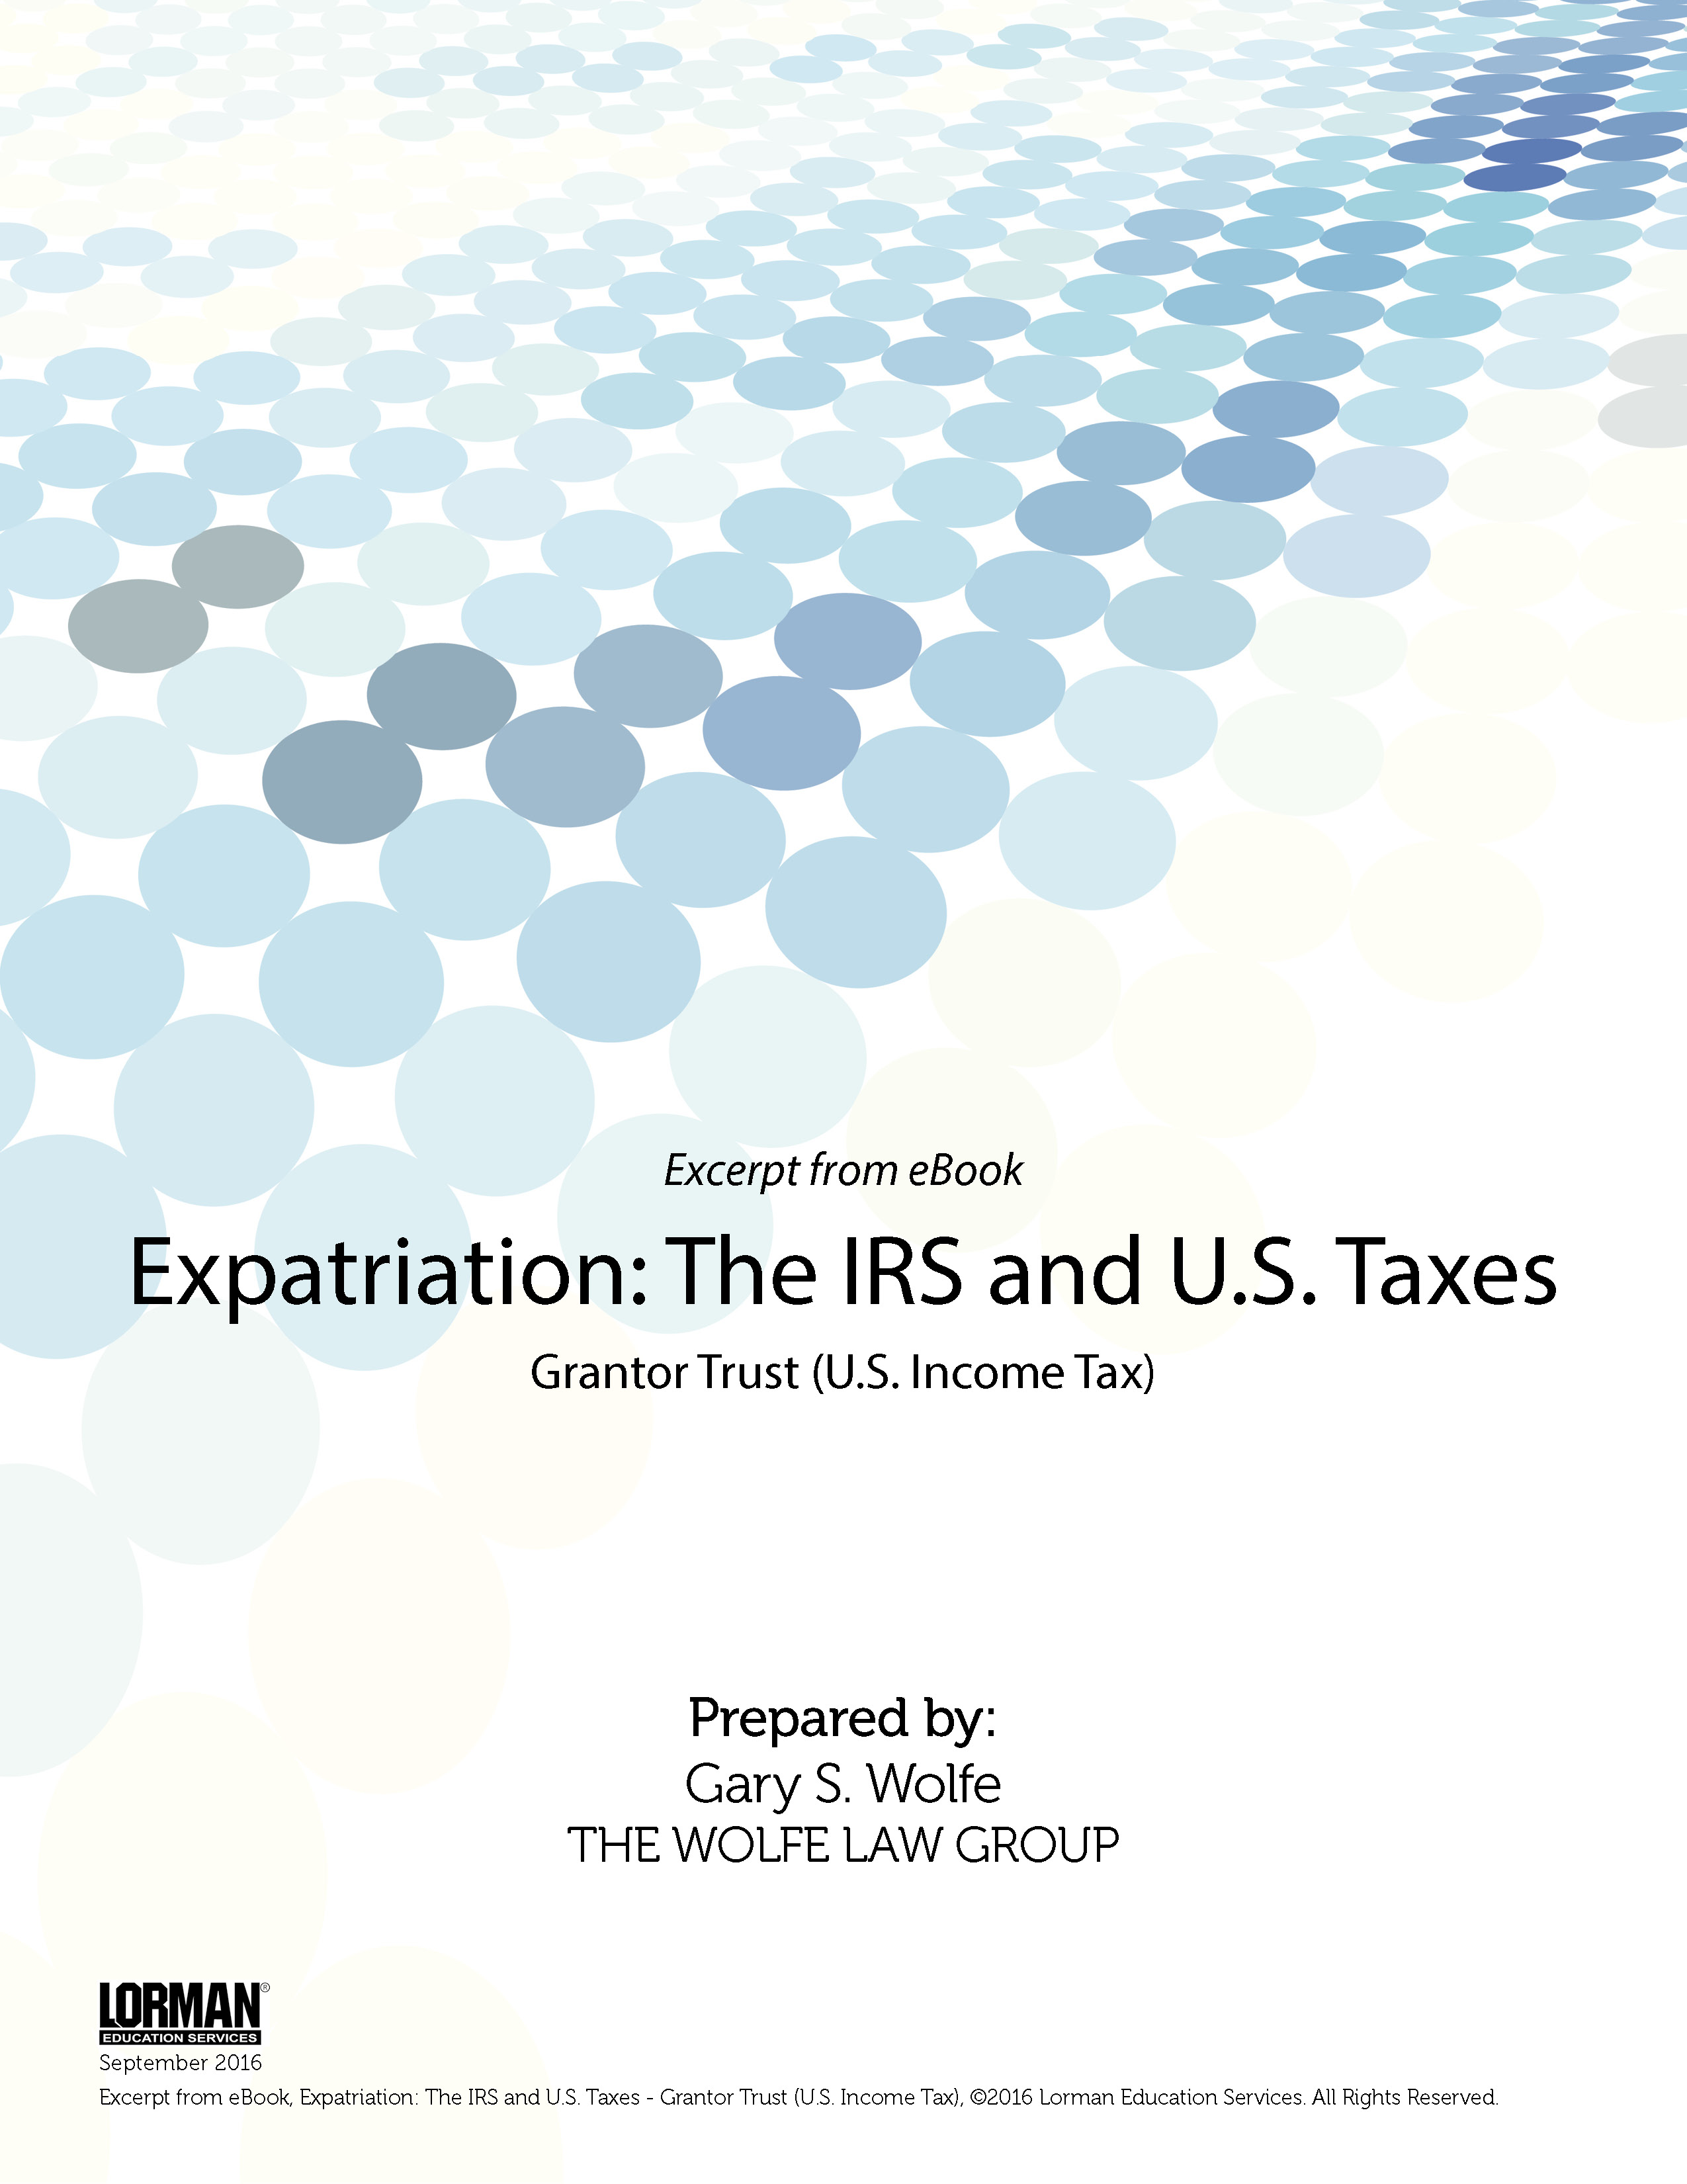 Expatriation - The IRS and U.S. Taxes - Grantor Trust (U.S. Income Tax)